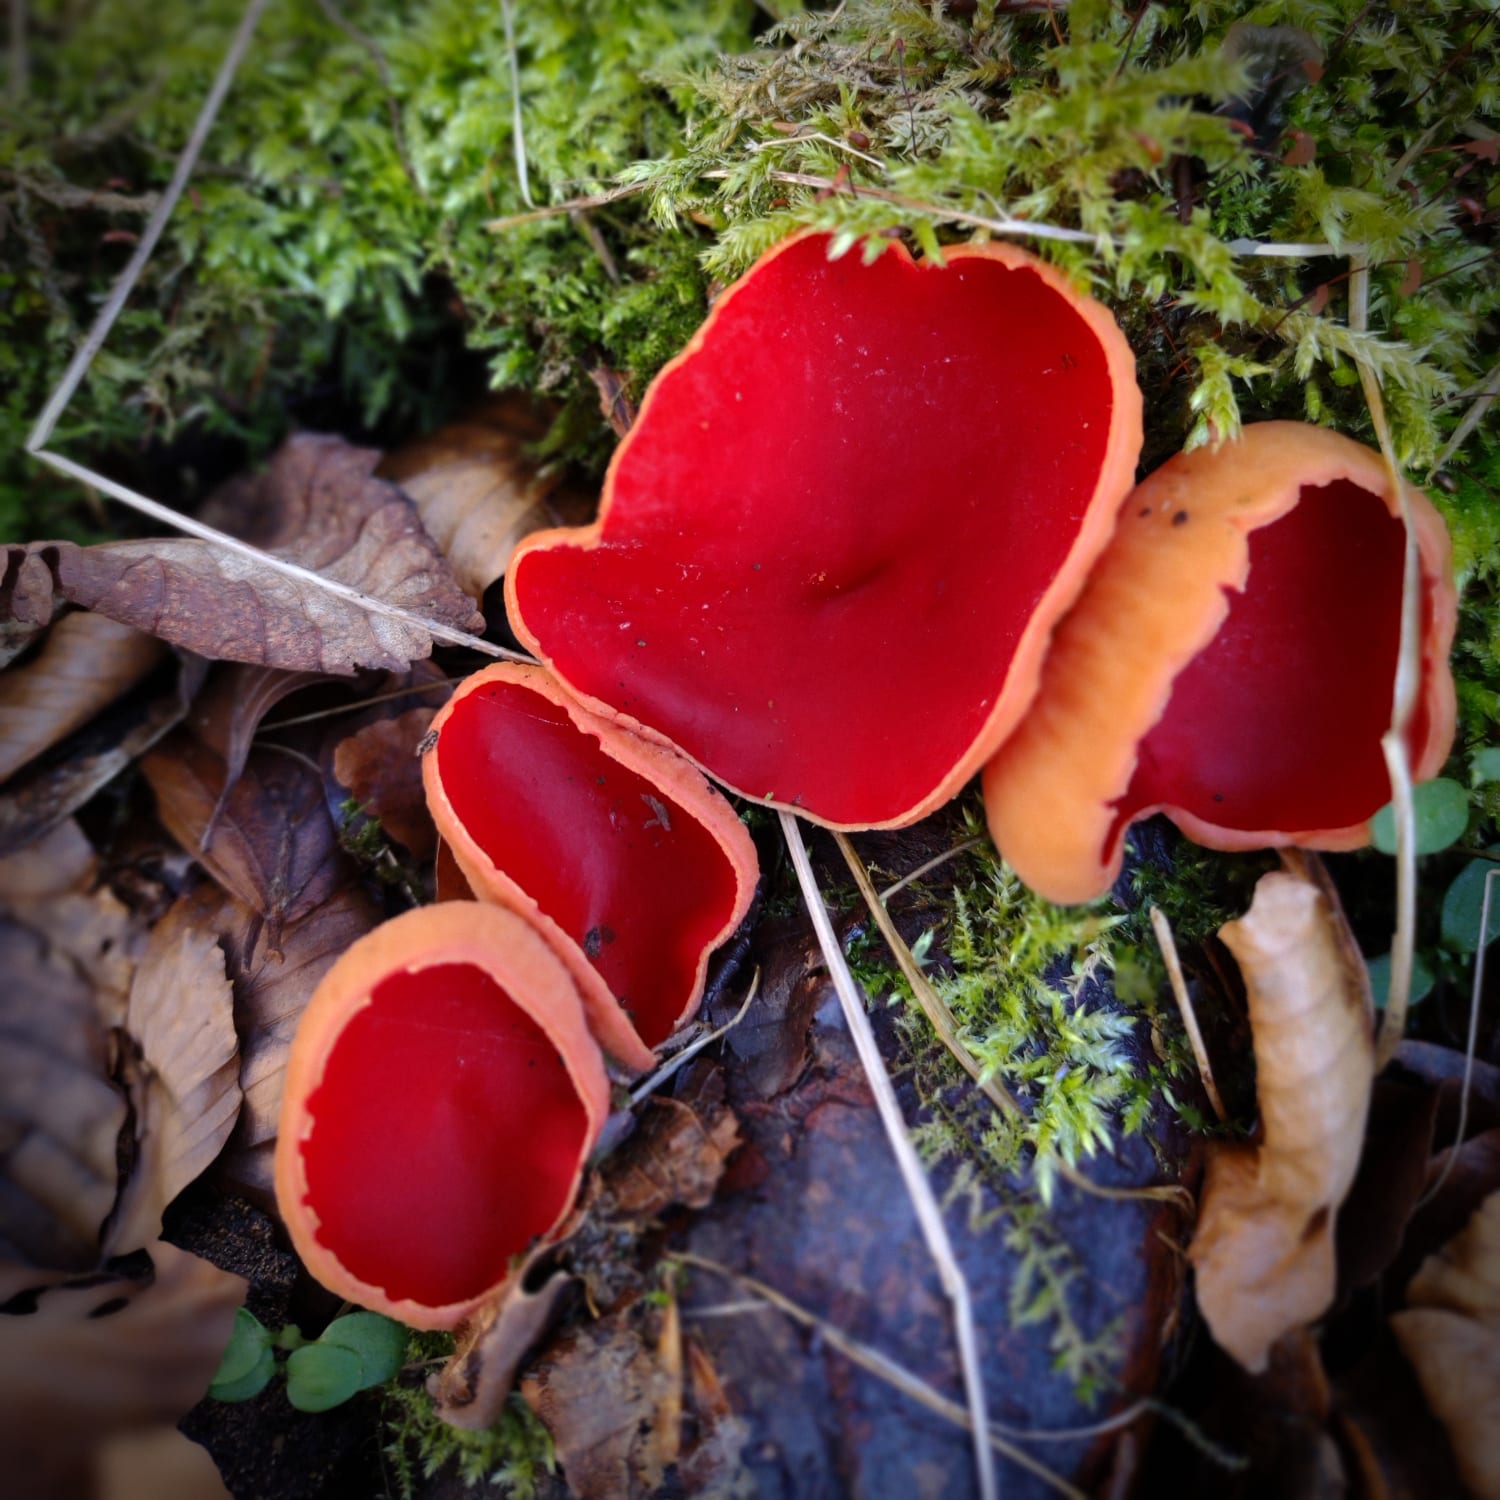 Elf Cups, found in Scottish woodland. According to folklore elves drink morning dew from them 🍄